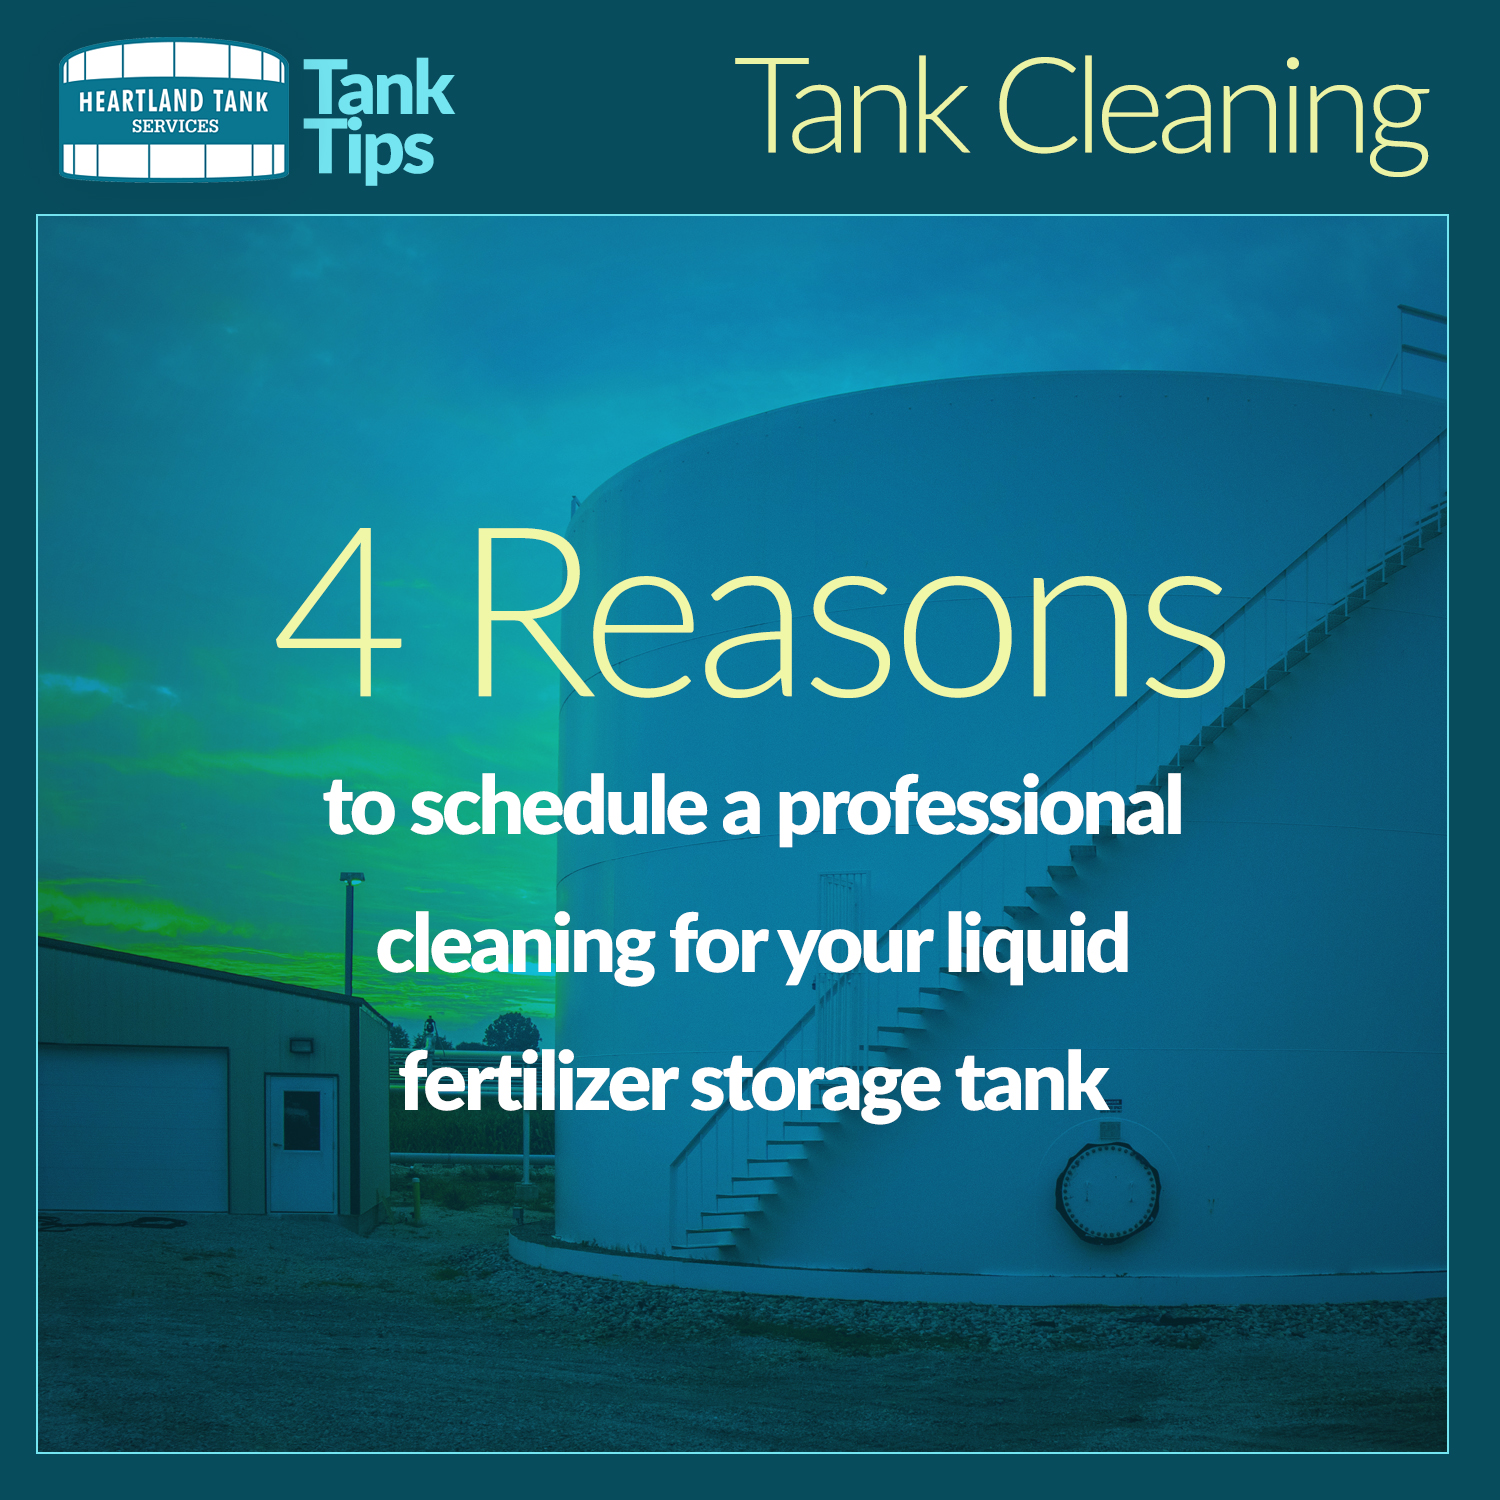 4 Reasons to Schedule a Professional Cleaning for your Liquid Fertilizer Storage Tank